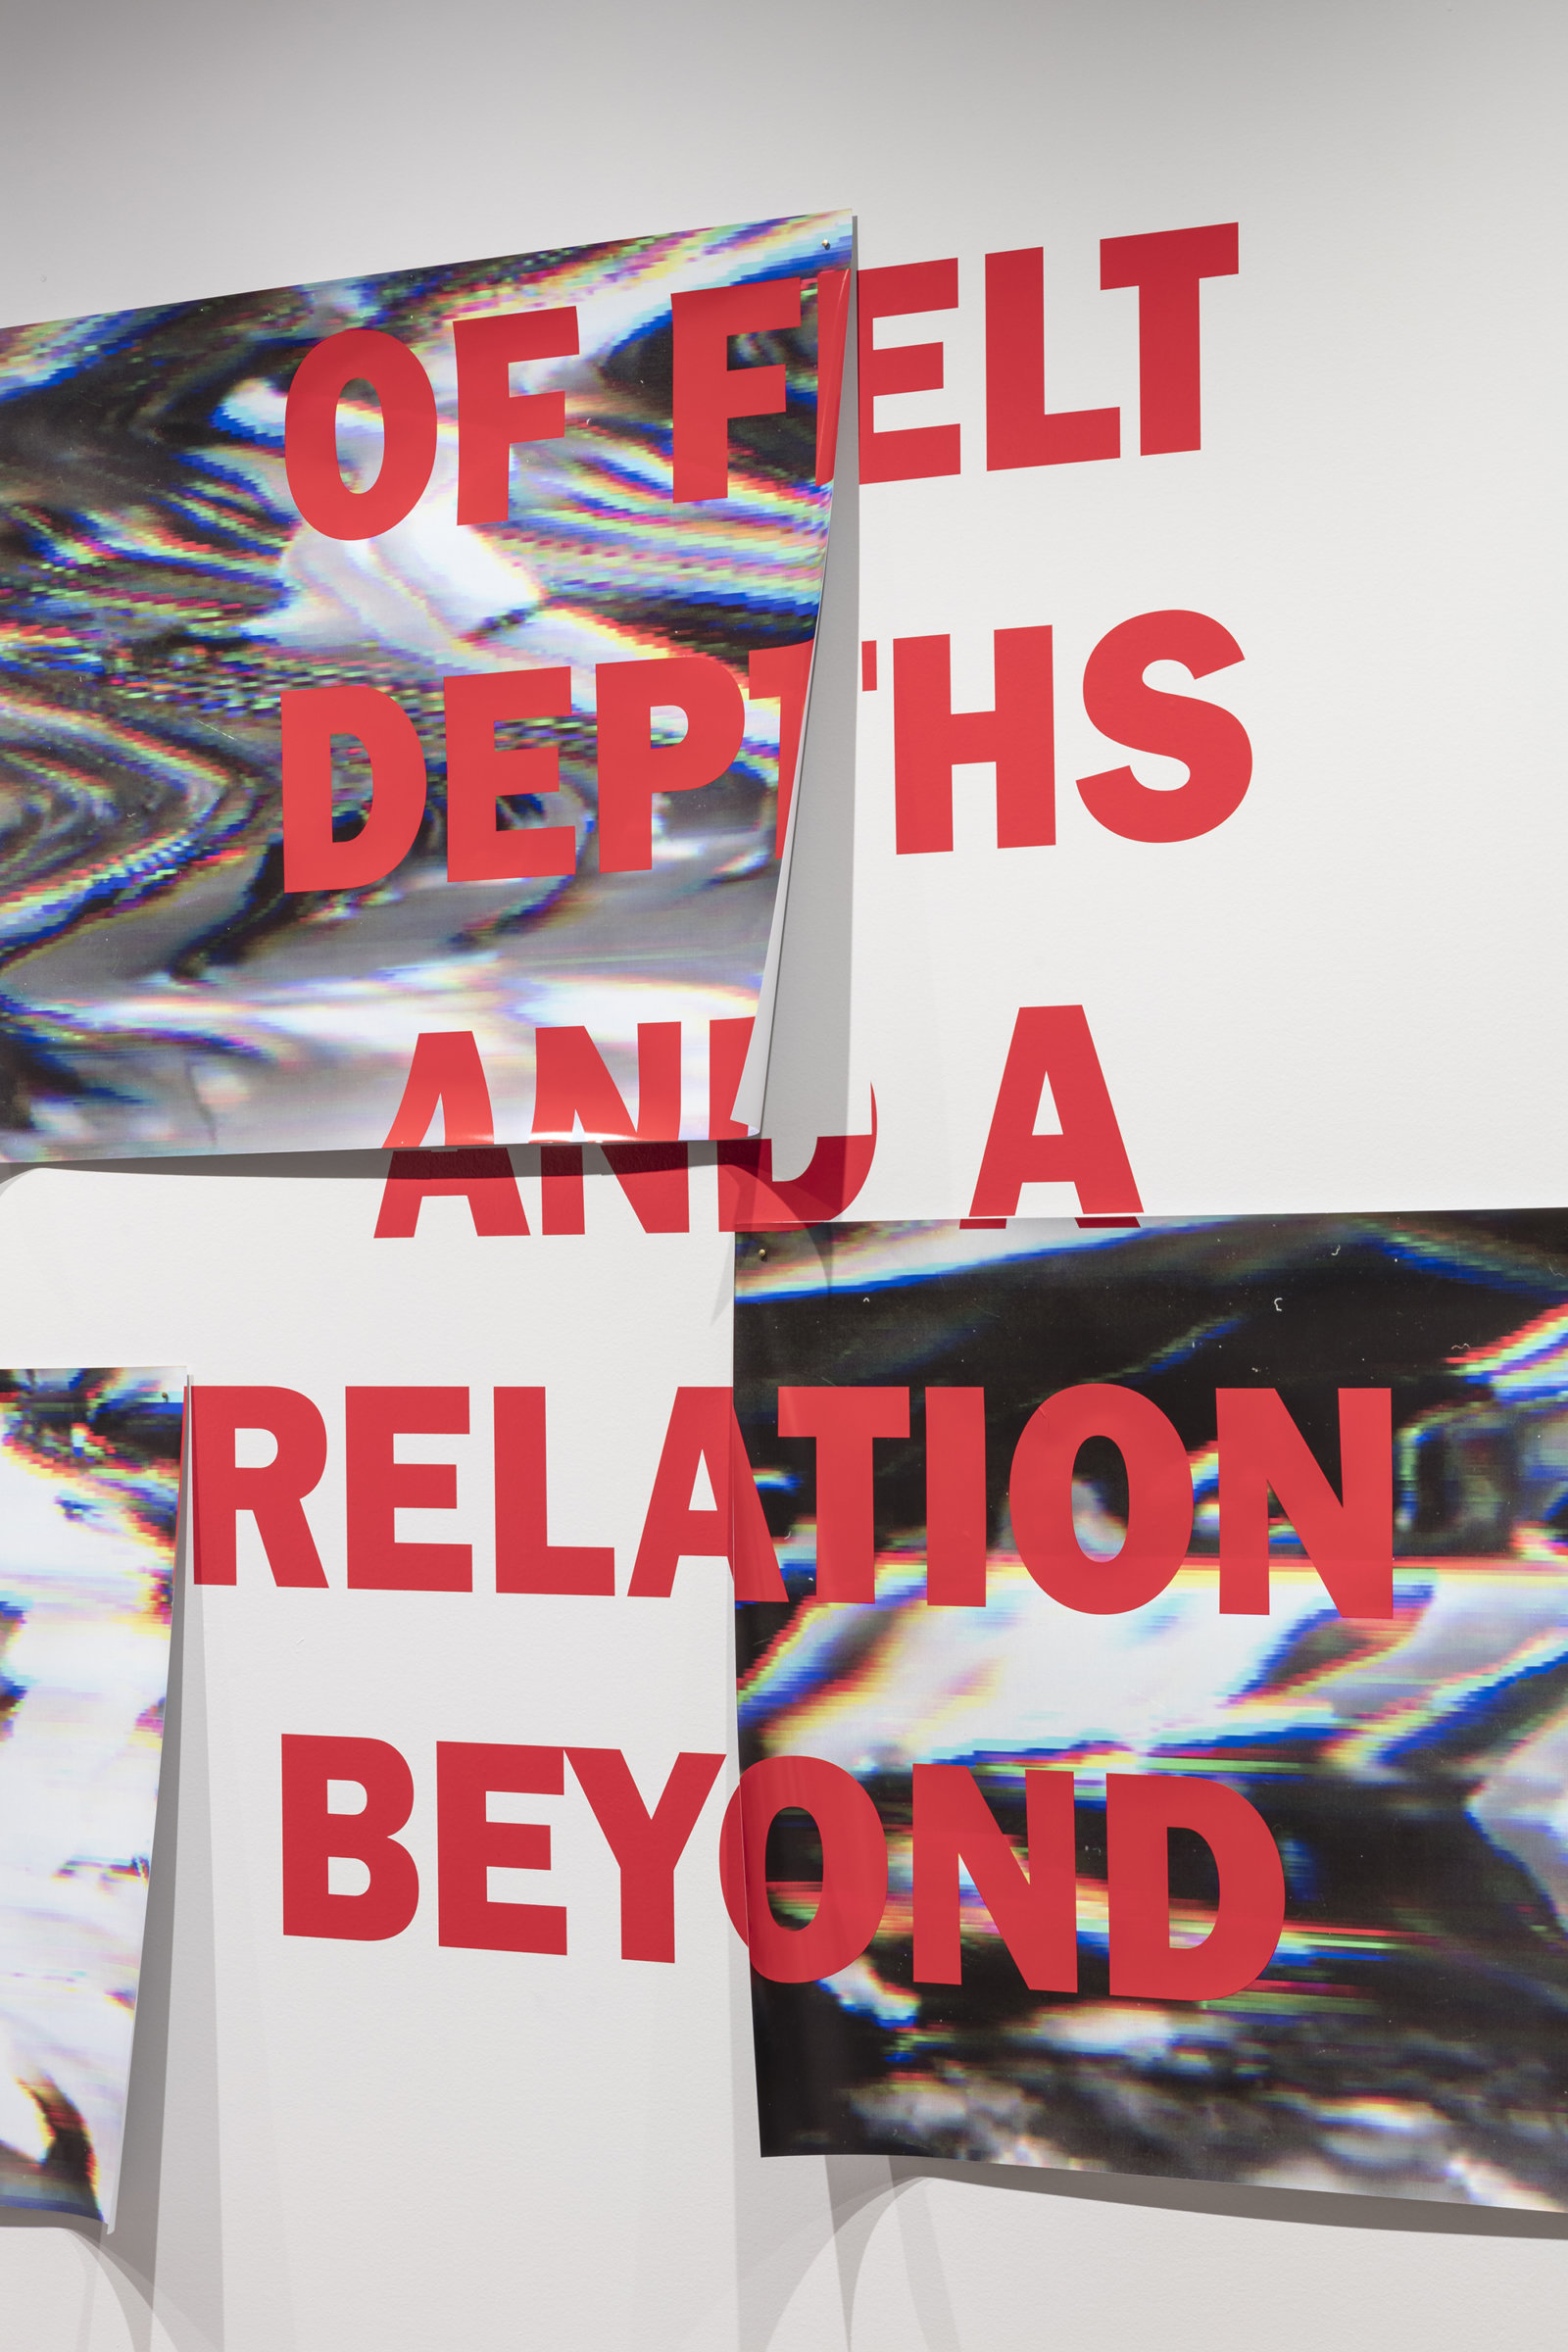 Raymond Boisjoly, Of felt depths and a relation beyond, 2016, vinyl lettering on solvent based inkjet print on vinyl, 63 x 102 in. (160 x 258 cm). Installation view, Over a Distance Between One and Many, Koffler Gallery, Toronto, ON, 2016